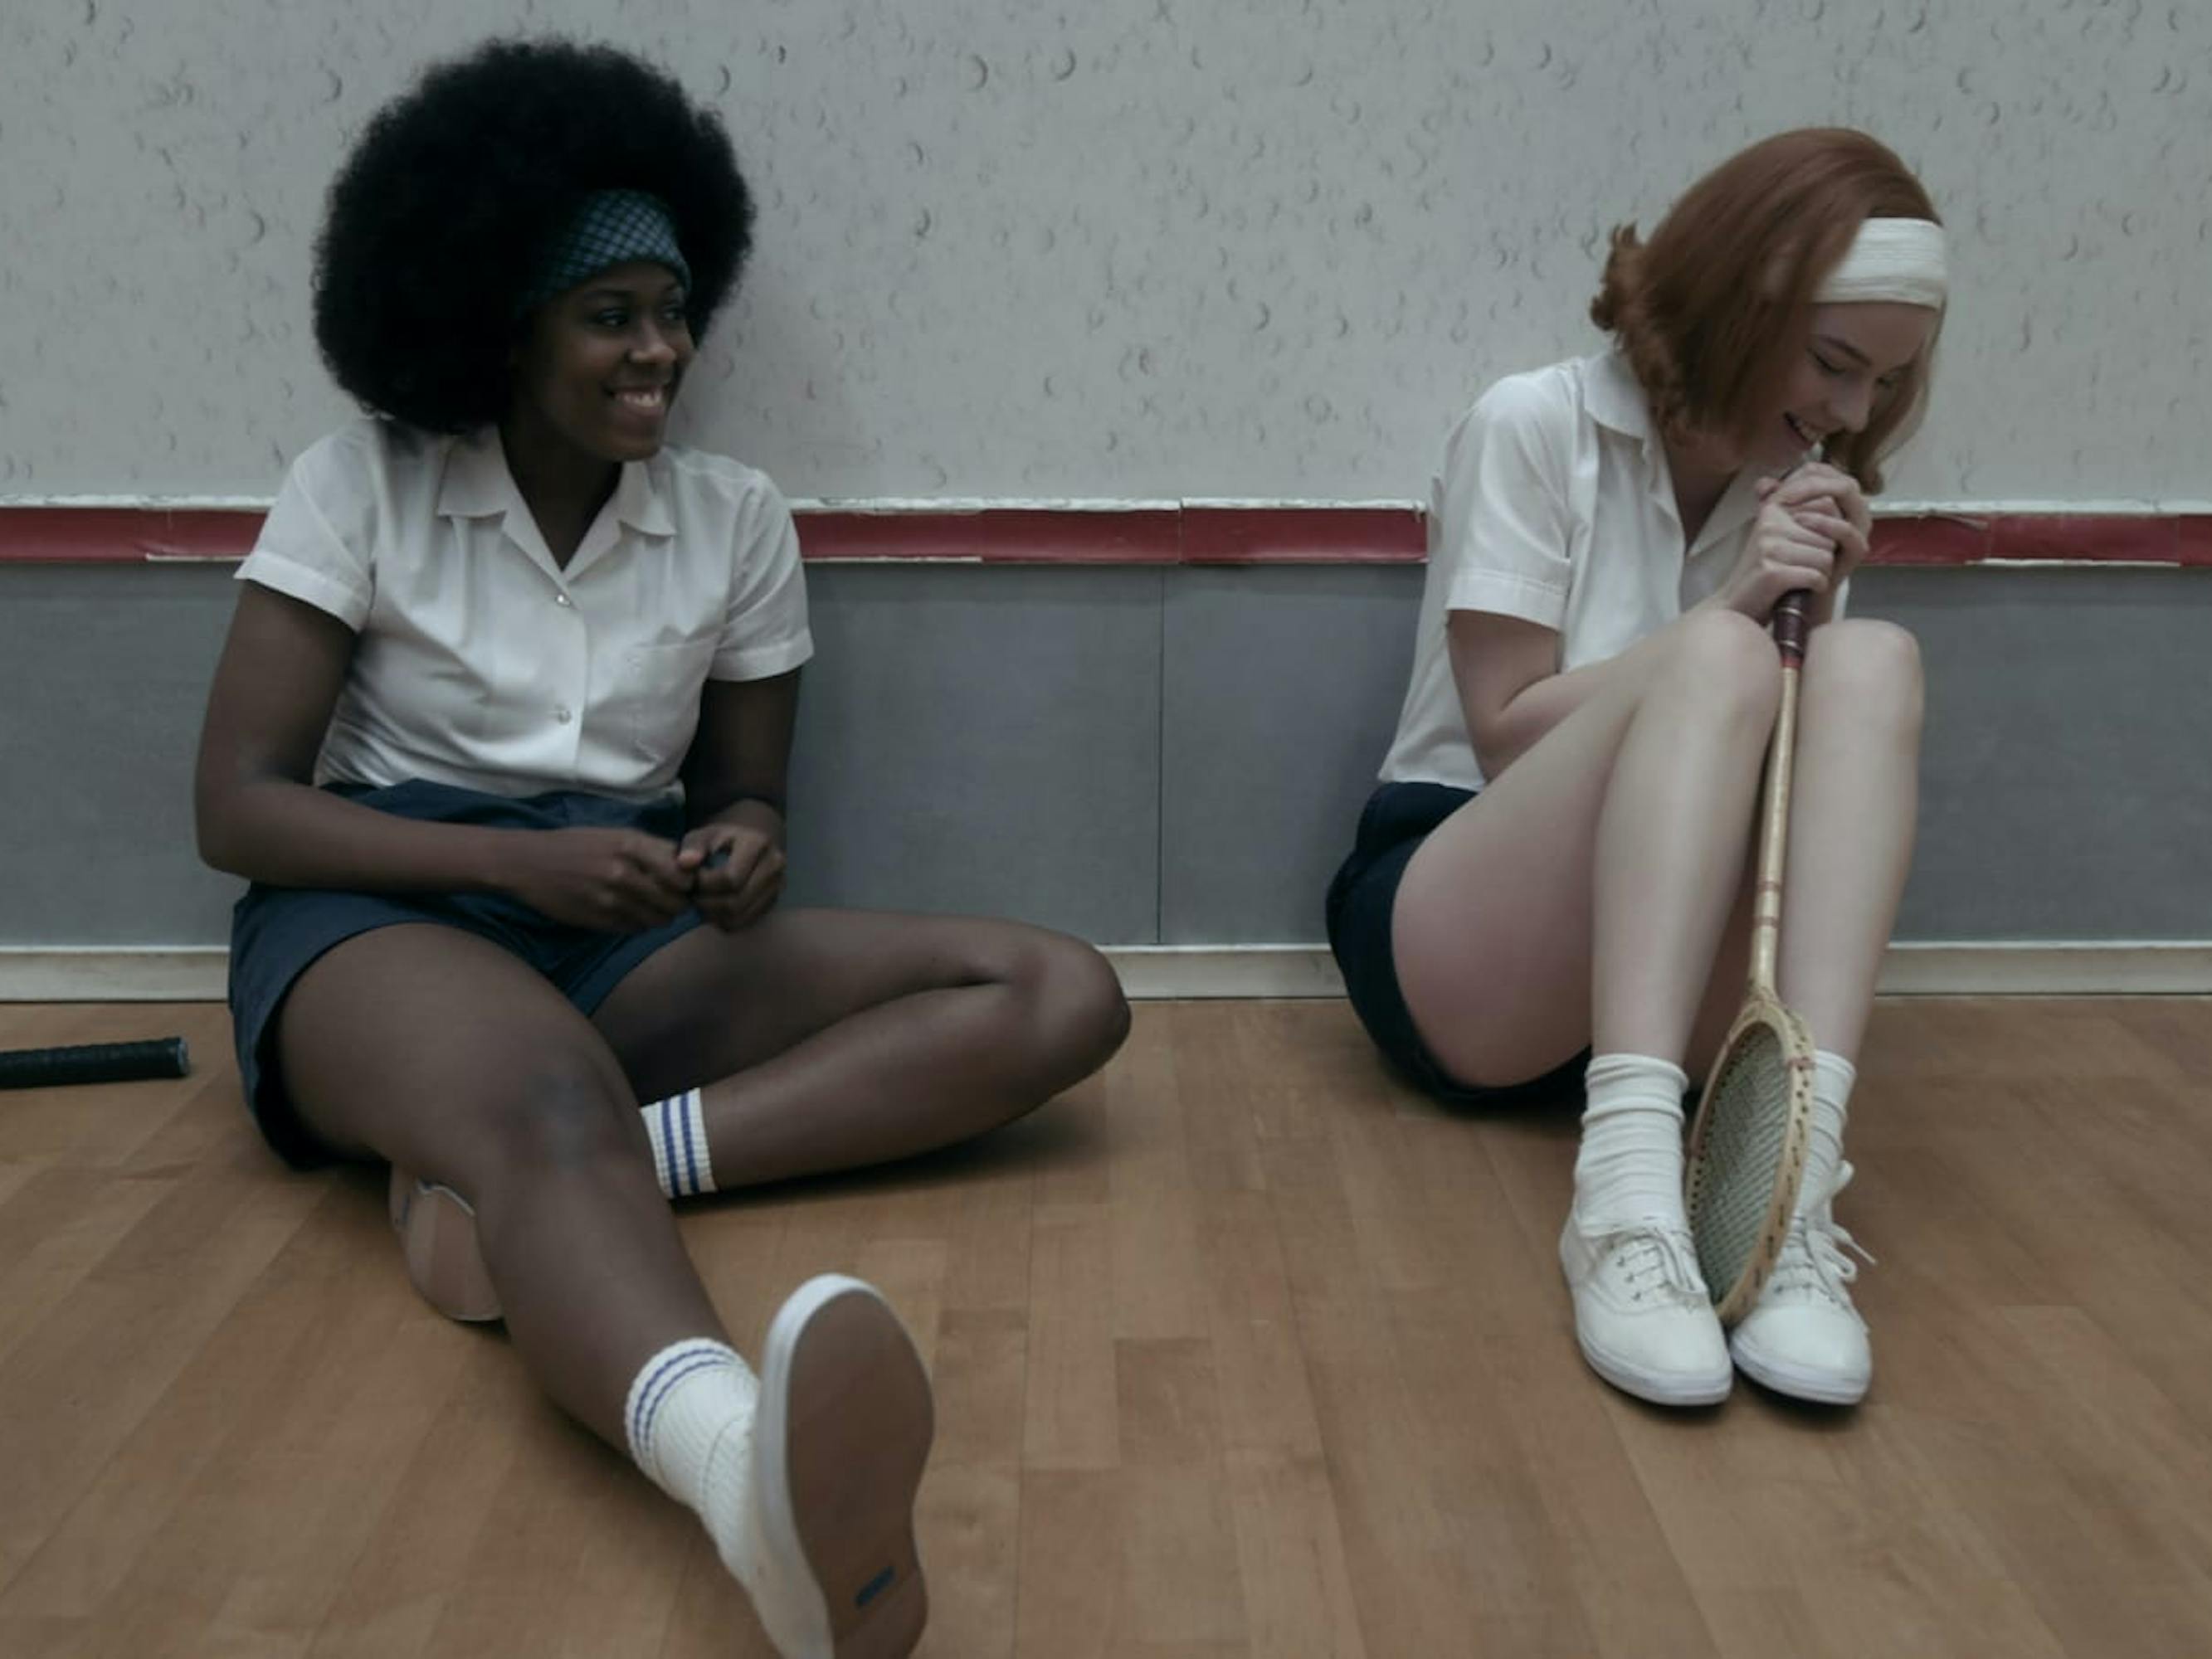 Jolene (Moses Ingram) and Beth Harmon (Anya Taylor-Joy) sit against a squash court wall. Both girls sport white collared shirts, dark shorts, headbands, white keds, and white socks. Taylor-Joy holds her racket between her legs, while Jolene’s lies on the ground beside her.